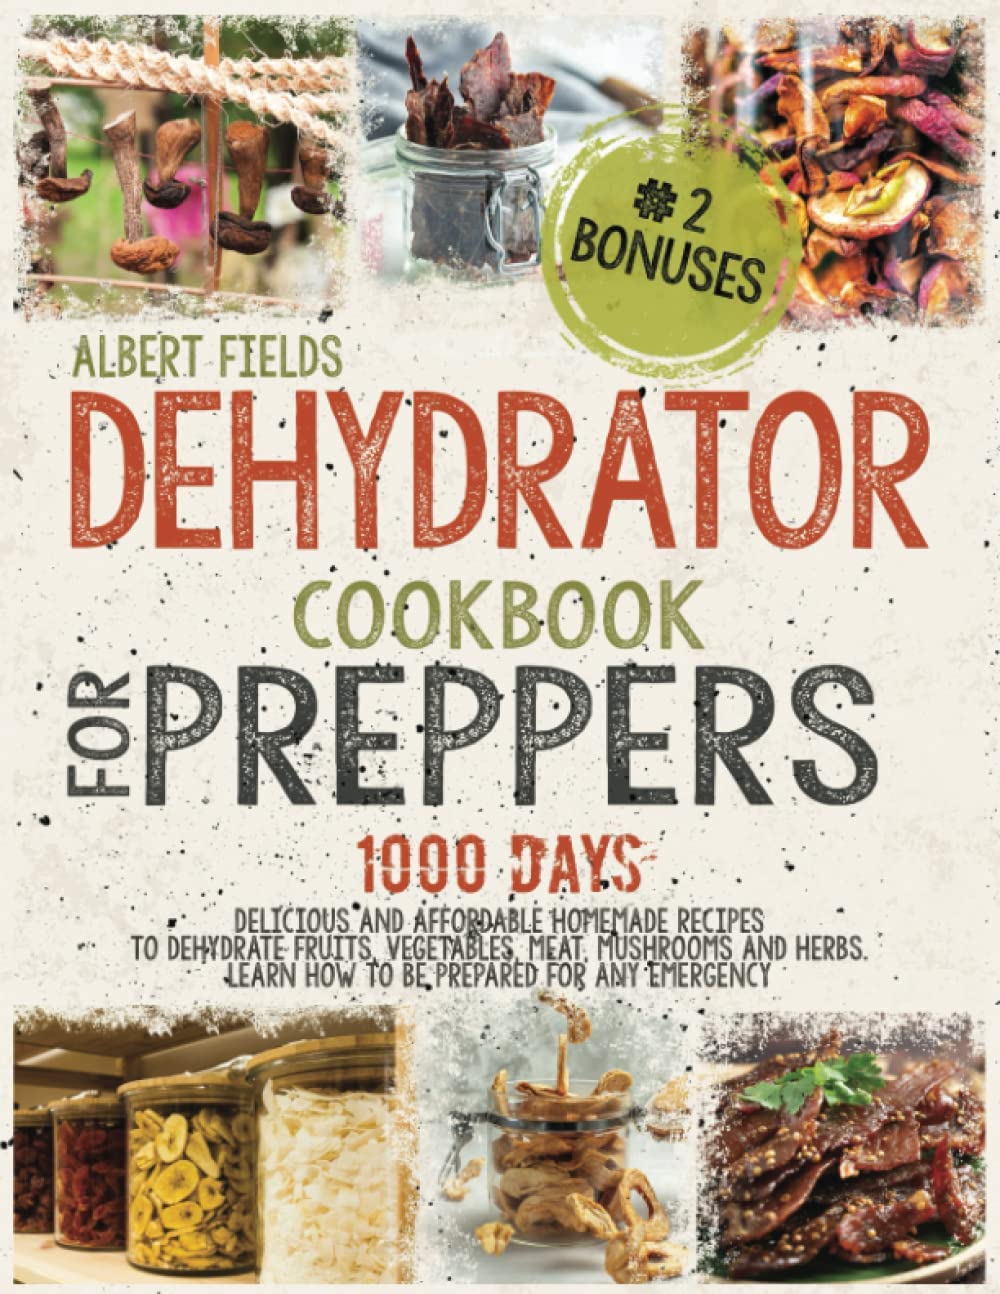 DEHYDRATOR COOKBOOK FOR PREPPERS: Delicious and Affordable Homemade Recipes to Dehydrate Fruits, Vegetables, Meat, Mushrooms and Herbs. Learn How To Be Prepared For Any Emergency